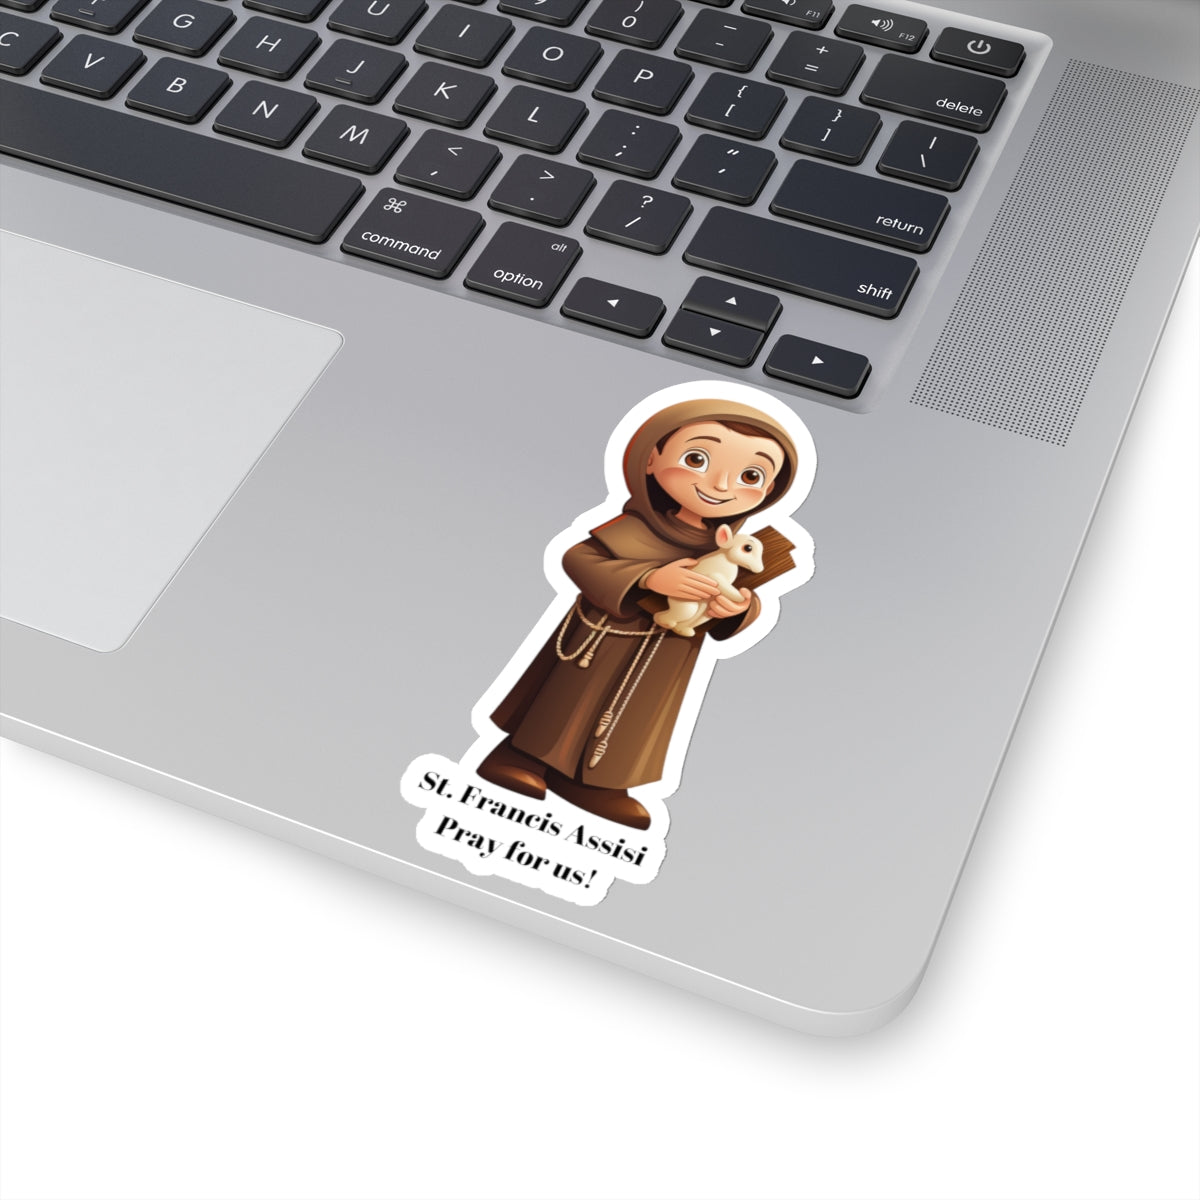 St Francis Assis, Sticker